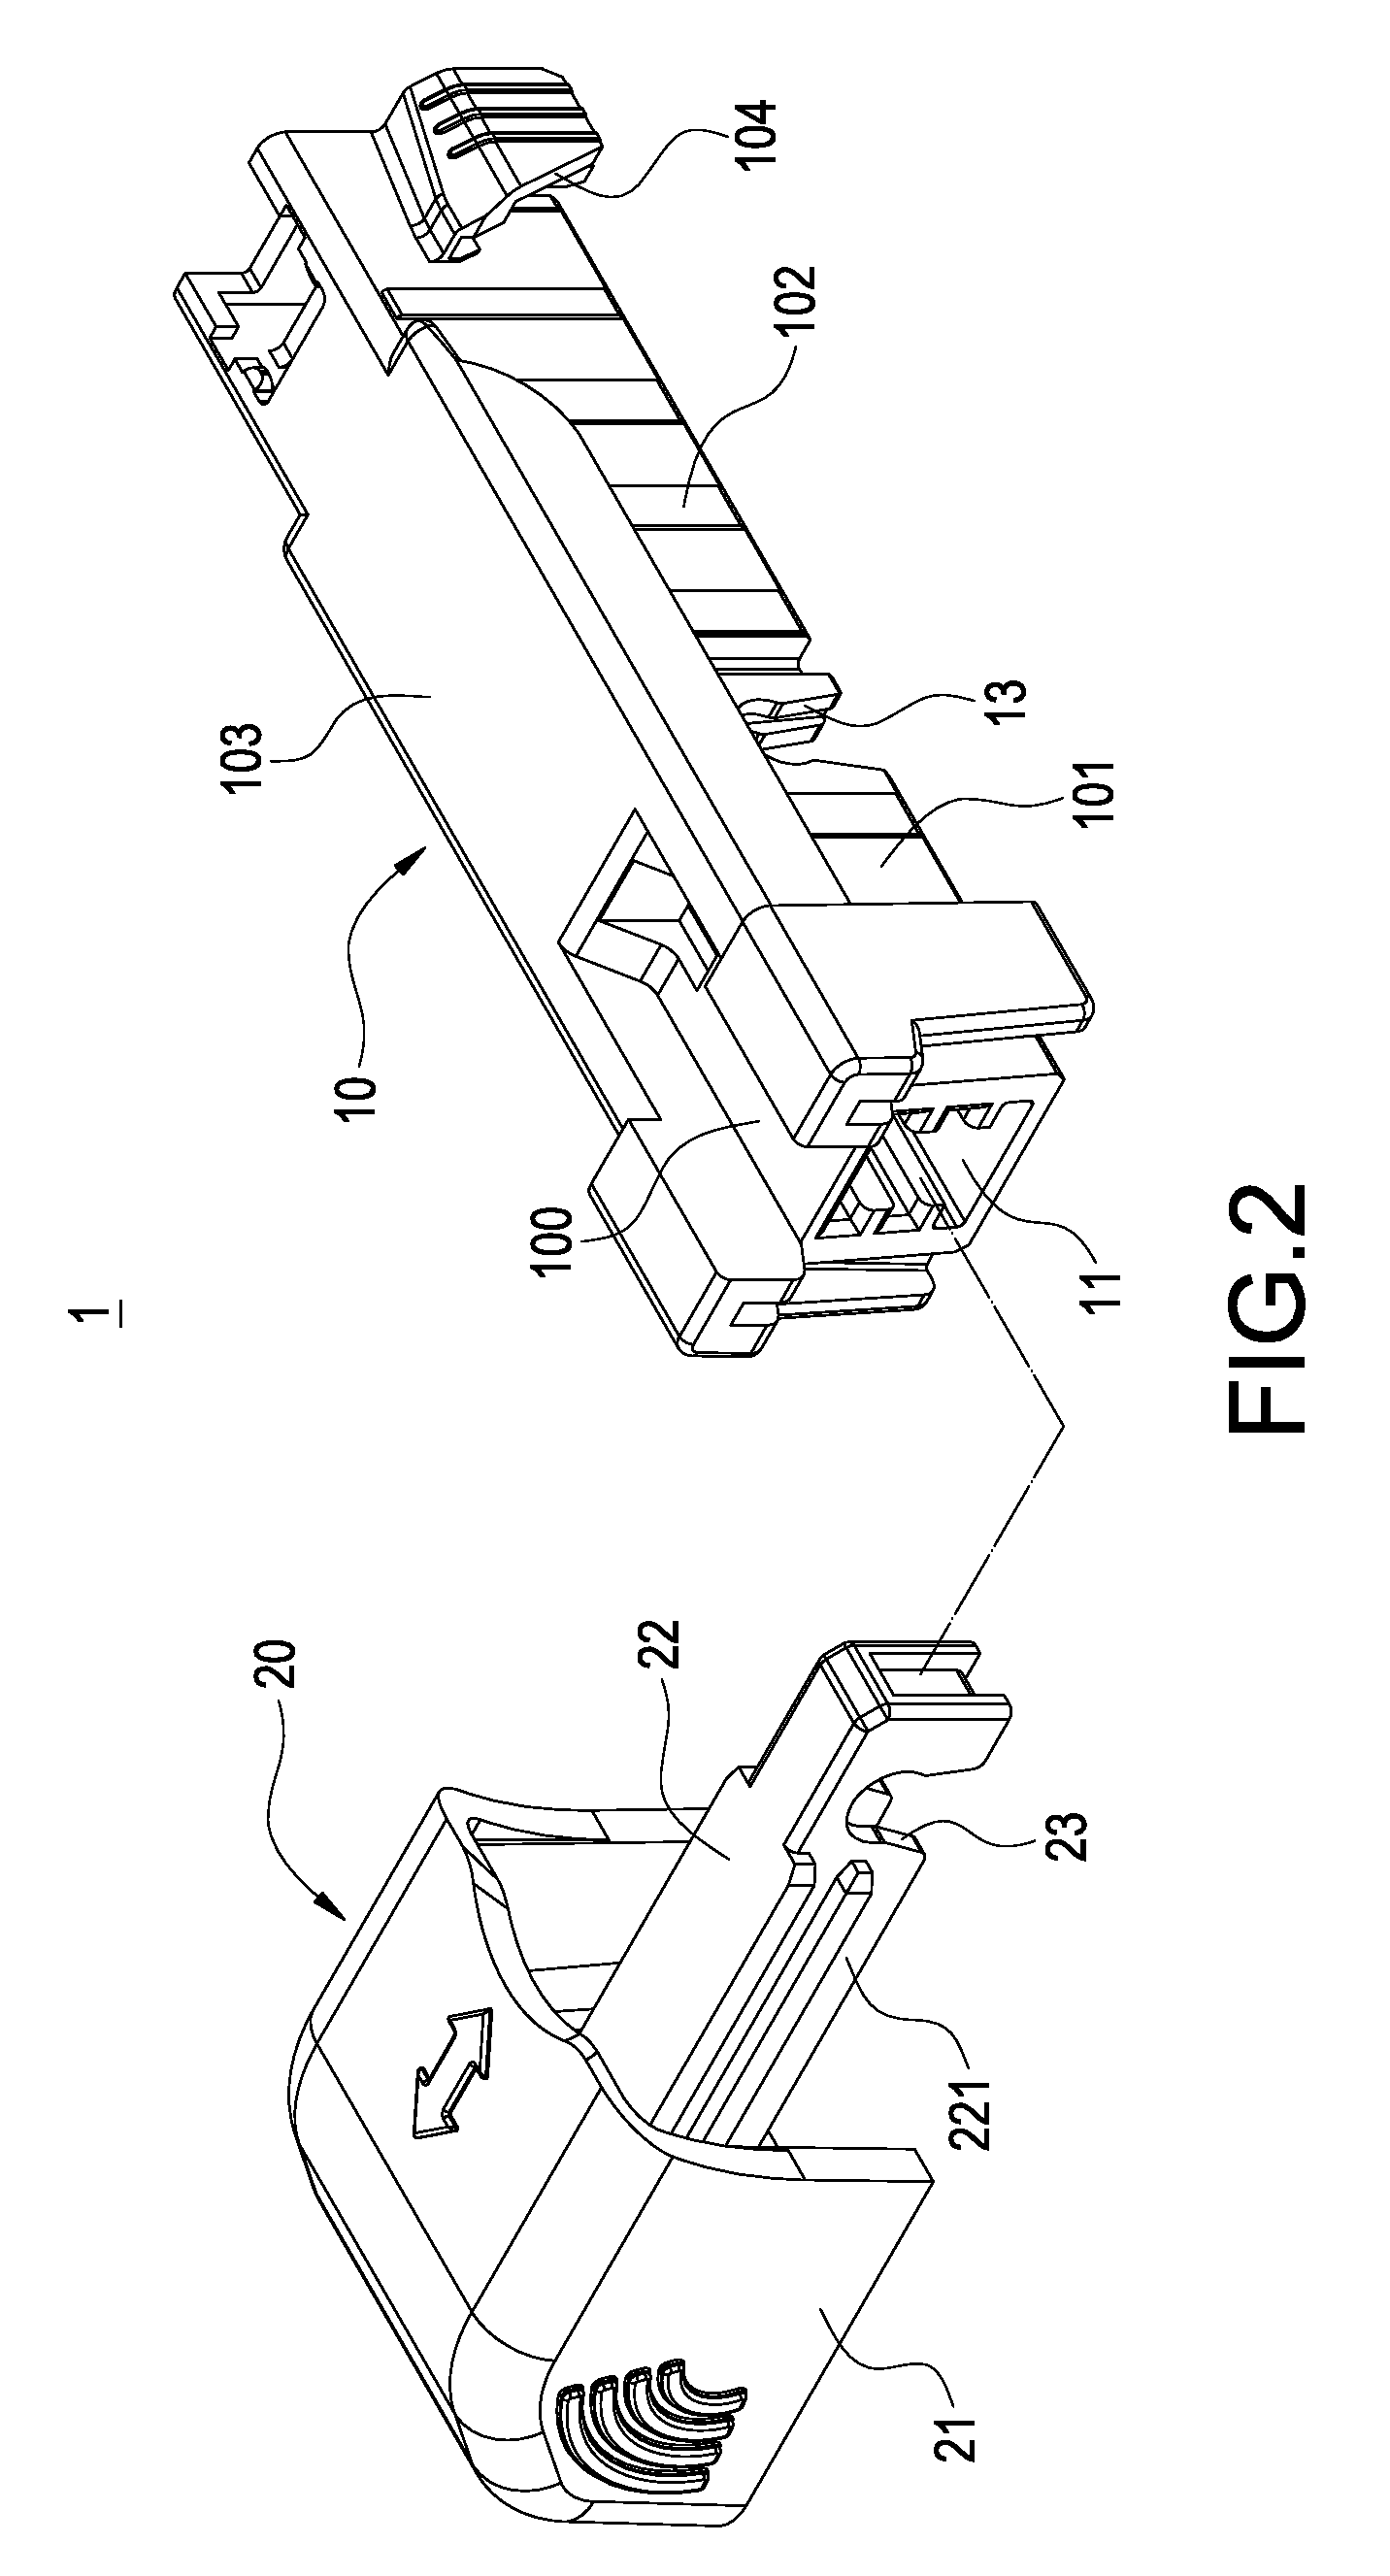 Windshield wiper assembling structure for preventing loose attachment of driven wiper arm